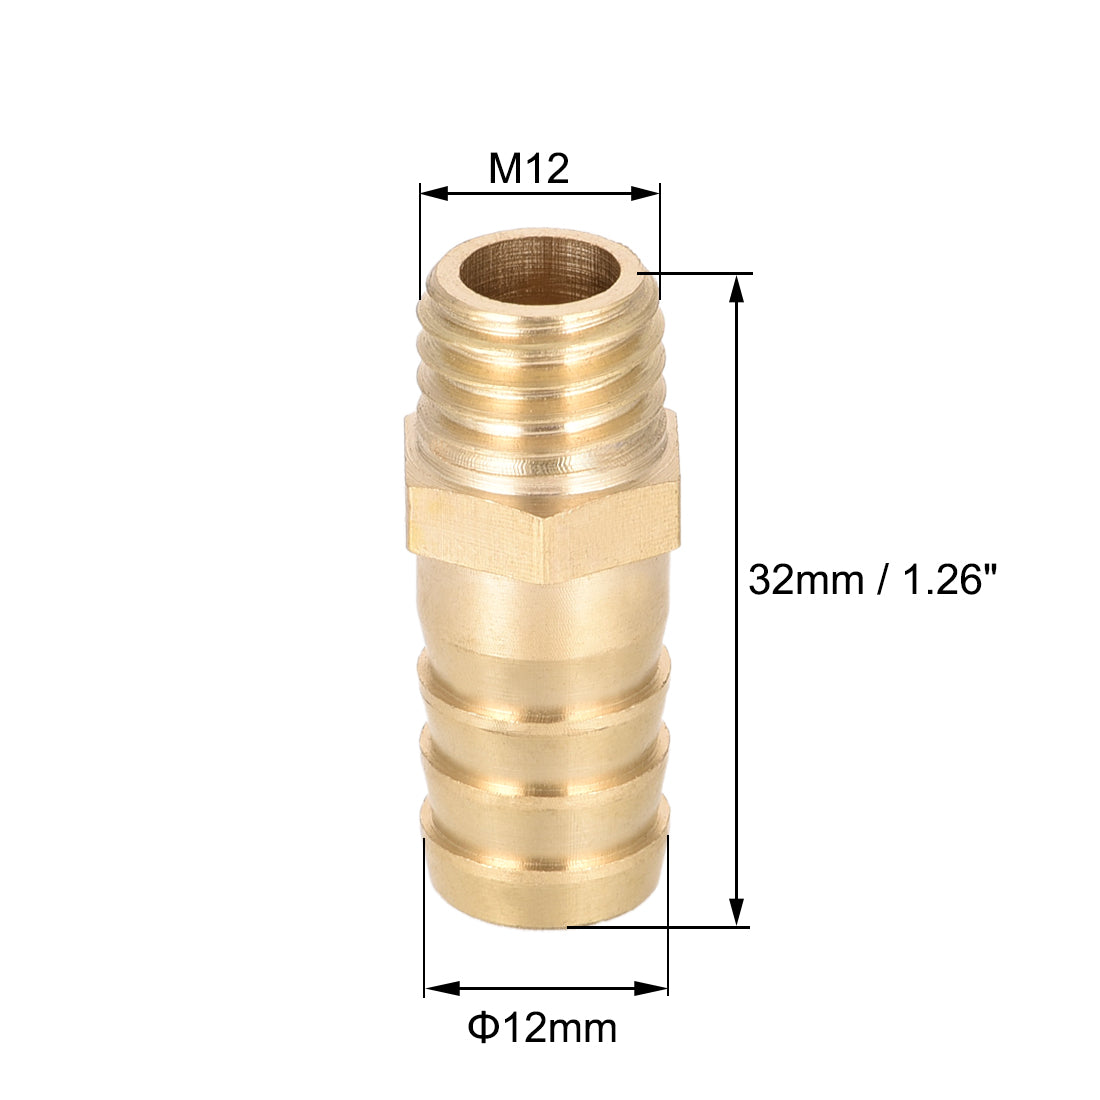 Uxcell Uxcell Brass Fitting Connector Metric M10-1.5 Male to Barb Fit Hose ID 10mm 4pcs